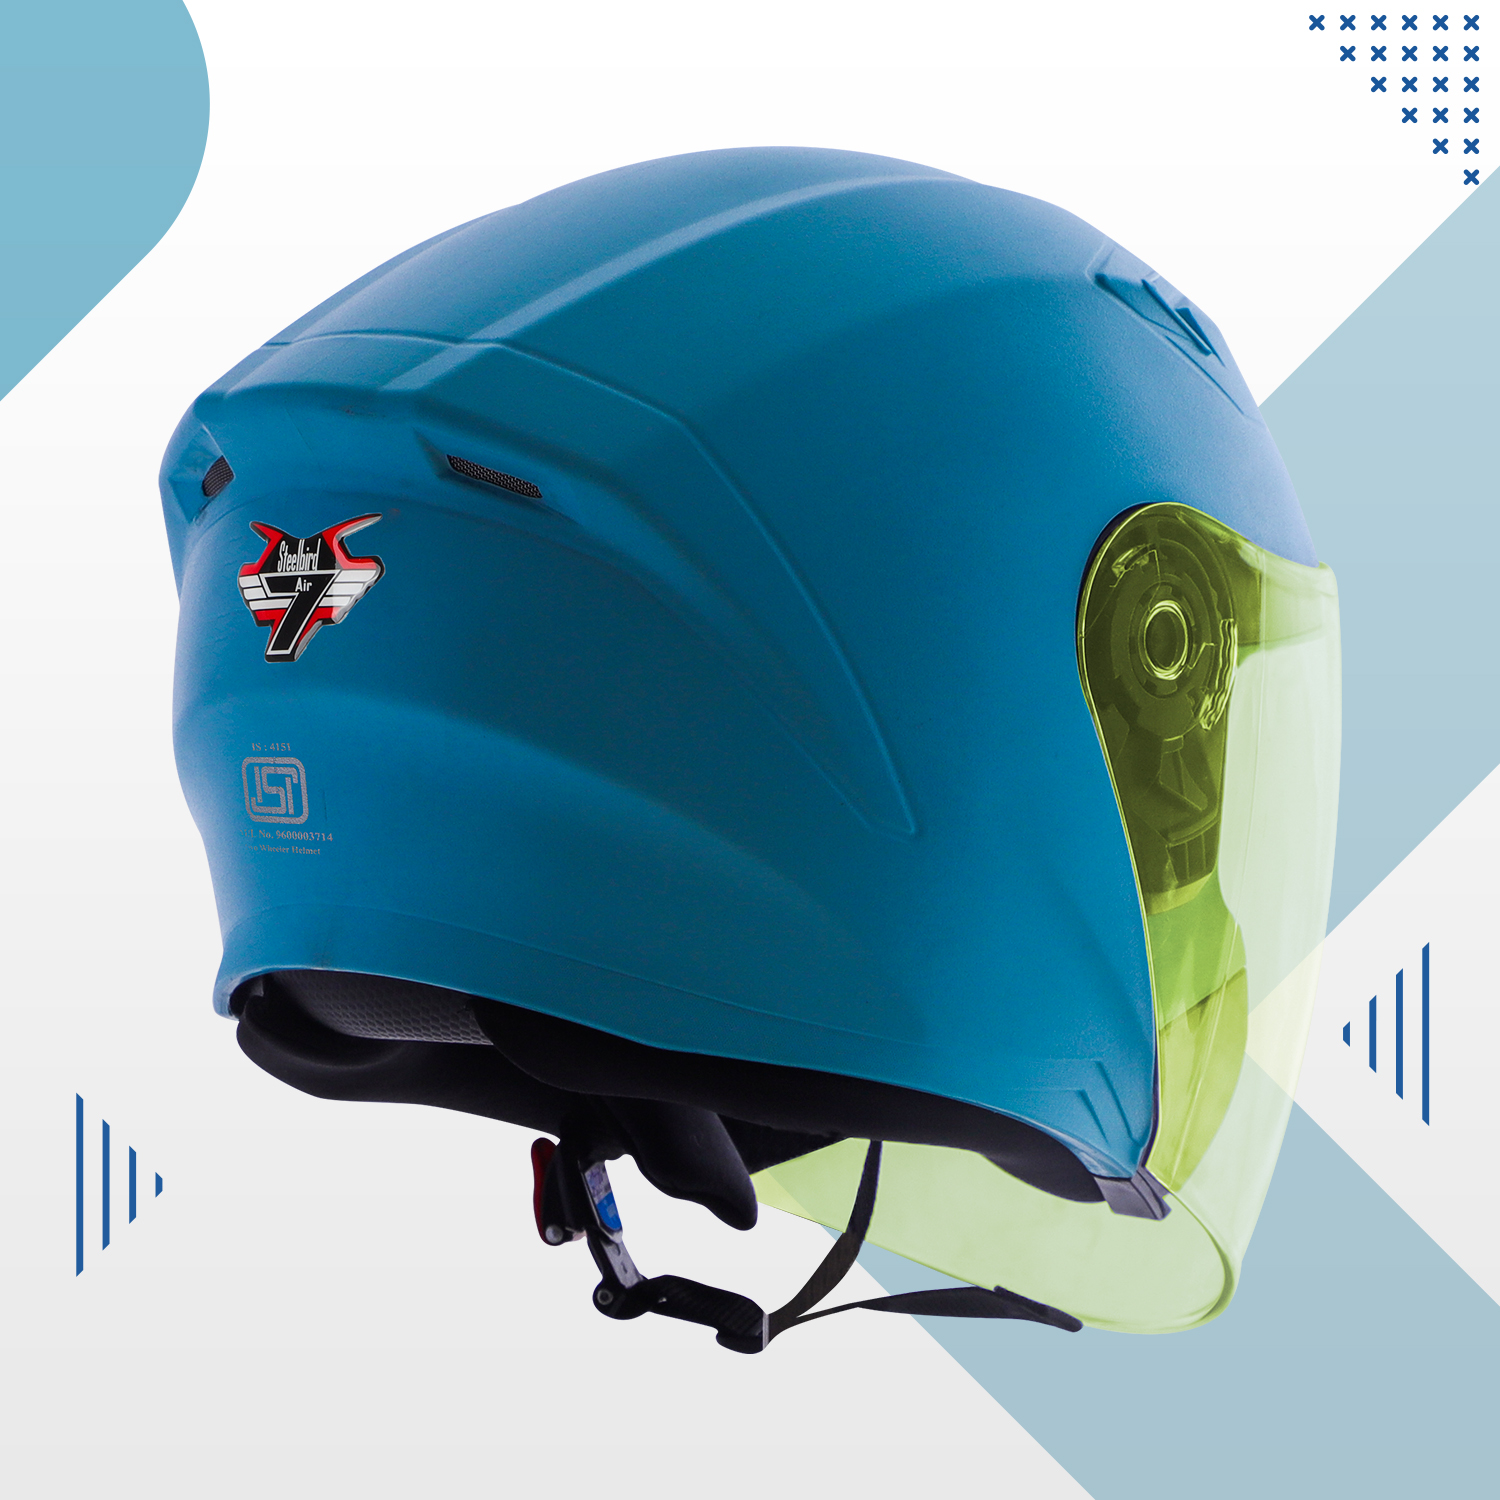 Steelbird SBA-17 7Wings ISI Certified Open Face Helmet For Men And Women (Dashing Jazz Blue With Tinted Yellow Visor)